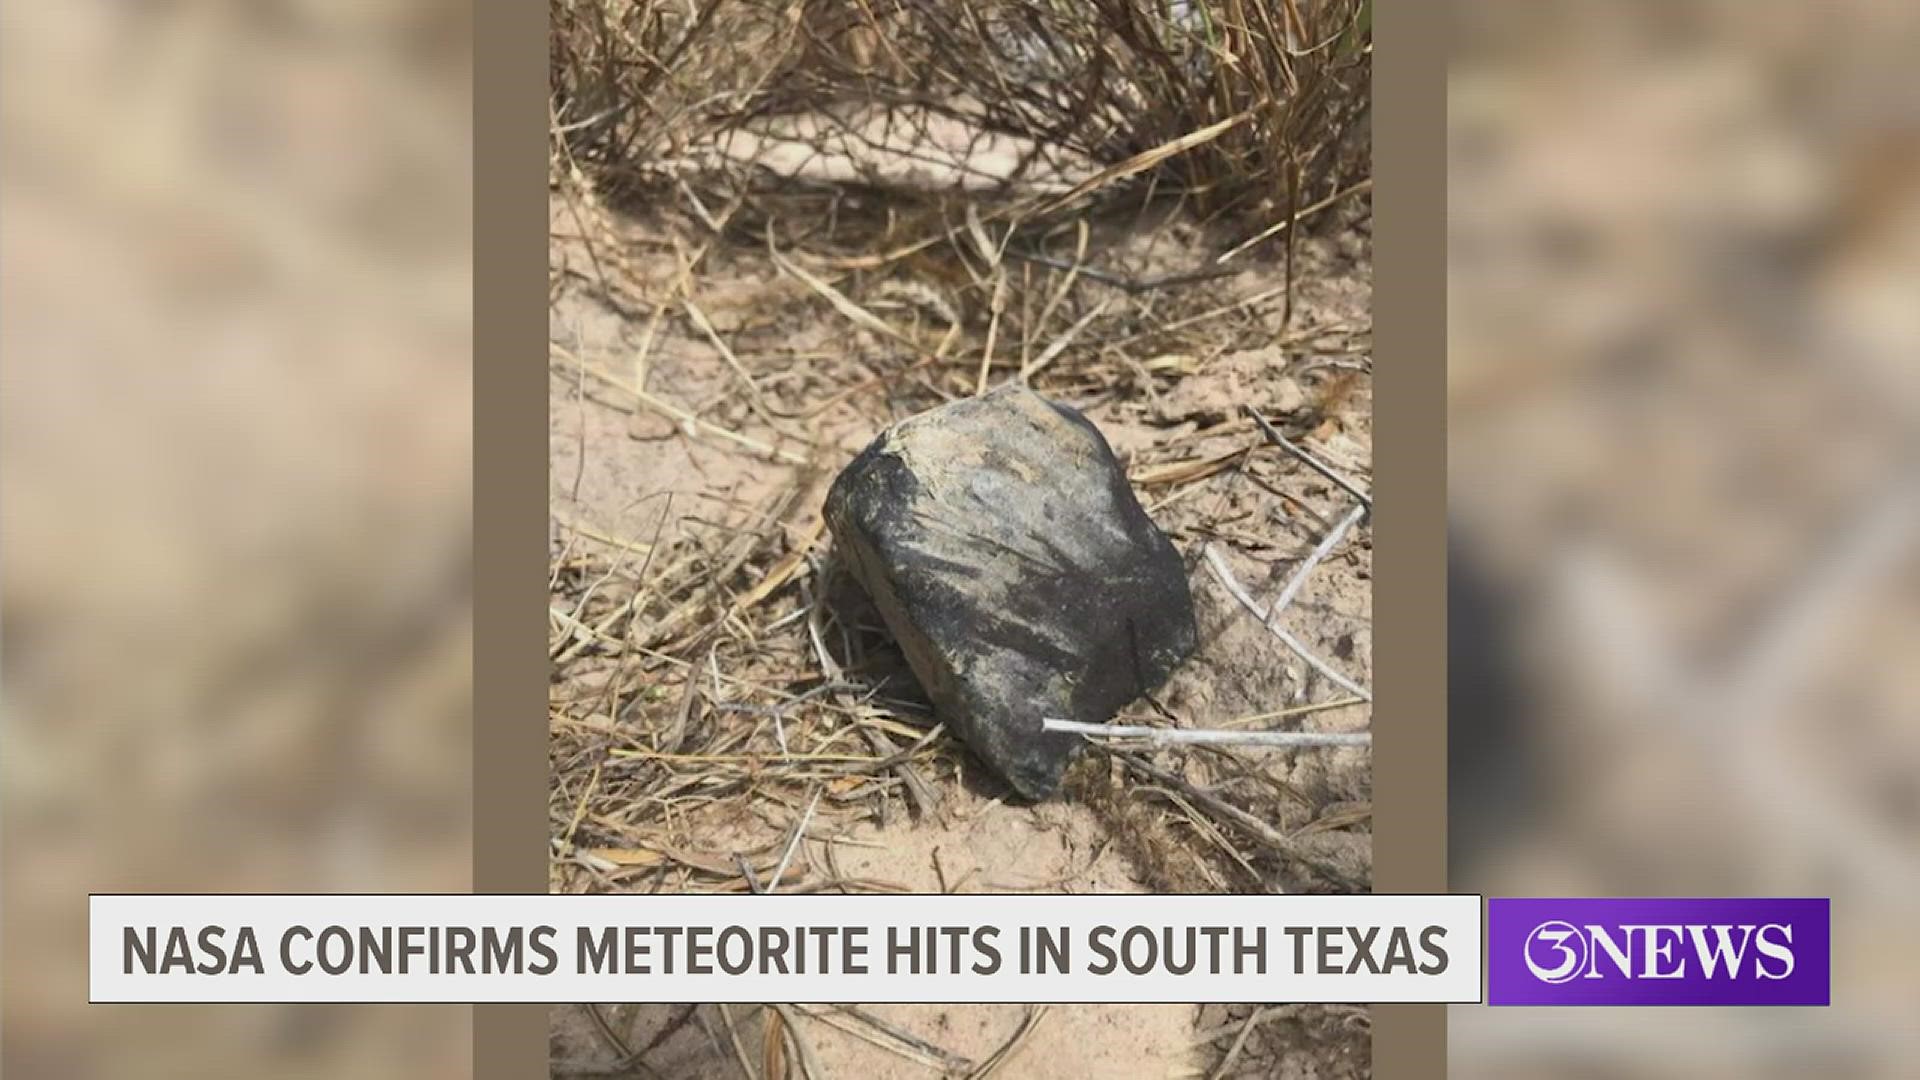 The meteorite, the American Meteor Society says, is from the Feb. 15 event that created a sonic boom and shook houses in the Rio Grande Valley.